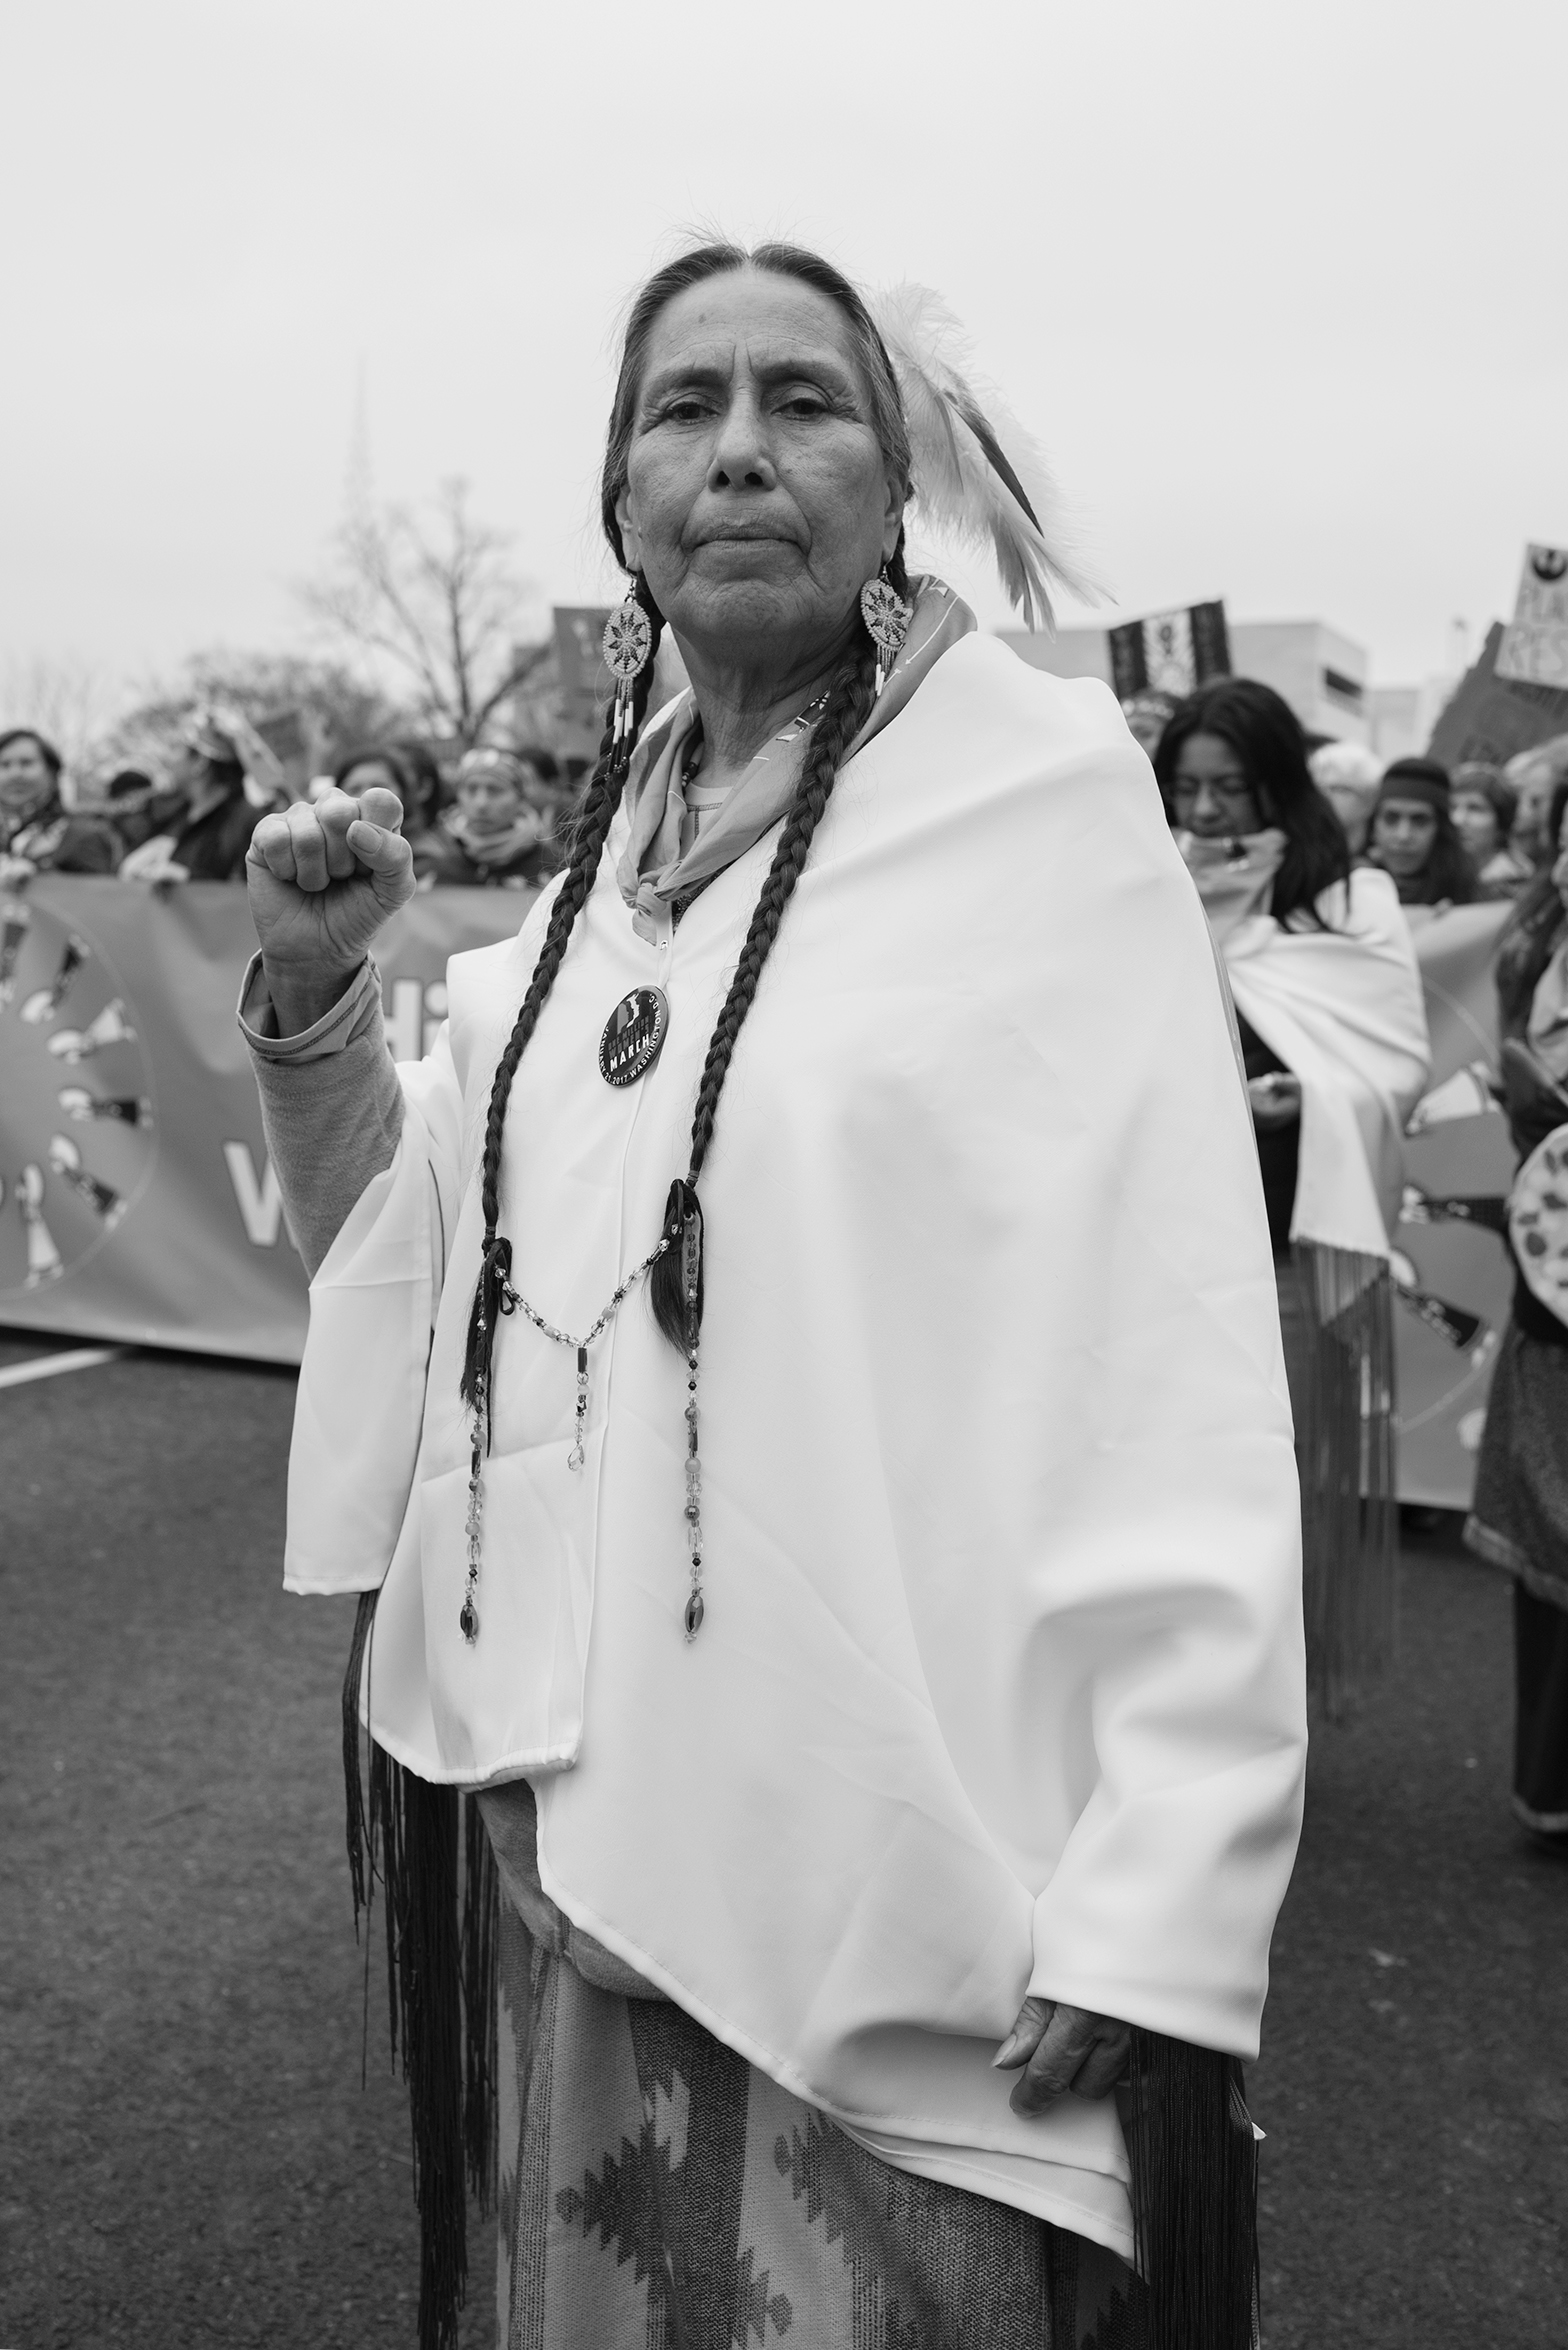 Casey Camp-Horinek, an elder of the Ponca Tribe of Oklahoma  
                              
                              I’m a mother a great grandmother and grandmother, sister and aunt and daughter. I’m here today for all those reasons I just told you. On behalf of our true mother, the one true mother we’ll share is our mother the earth and she’s under threat right now. We want our lives to continue the way that our ancestors have, we want that for your children as well, and even for his (Trump’s)  grandchildren.  In Oklahoma we’re suffering from environmental genocide We feel it’s necessary to speak for all of those without voices, those that fly, those that swim, the sacred water itself, the very breath that the creator gave us, on behalf of our mother the earth those that have roots and sway in the wind, all of those things are begging for all of humankind to pray for them and nurture them as well.